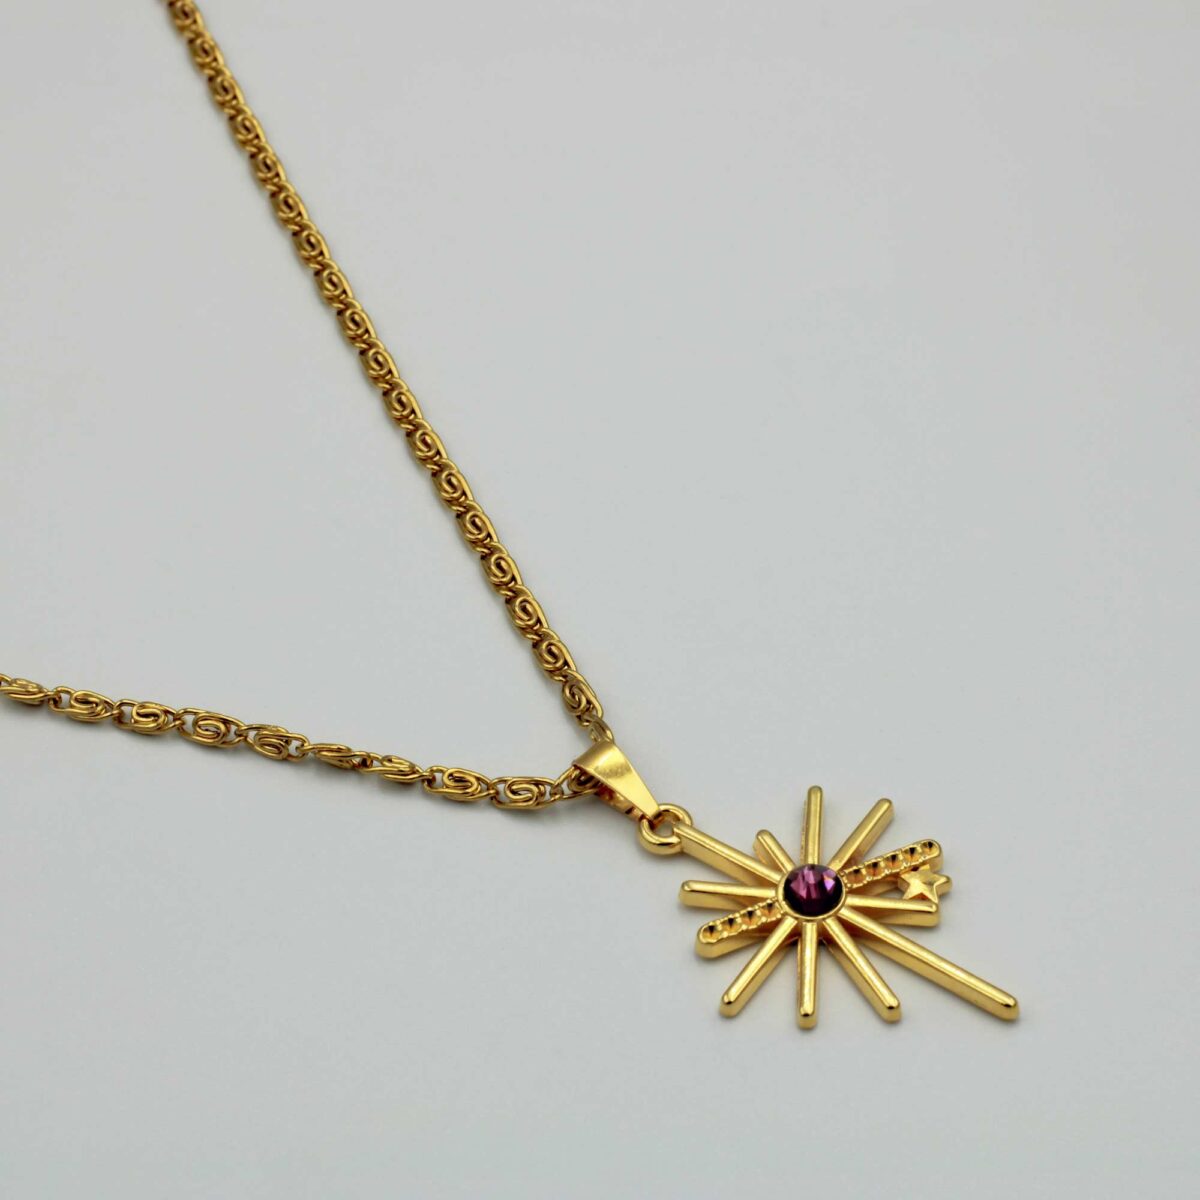 Women's Necklace Gold Plated 24k with Radial Motif